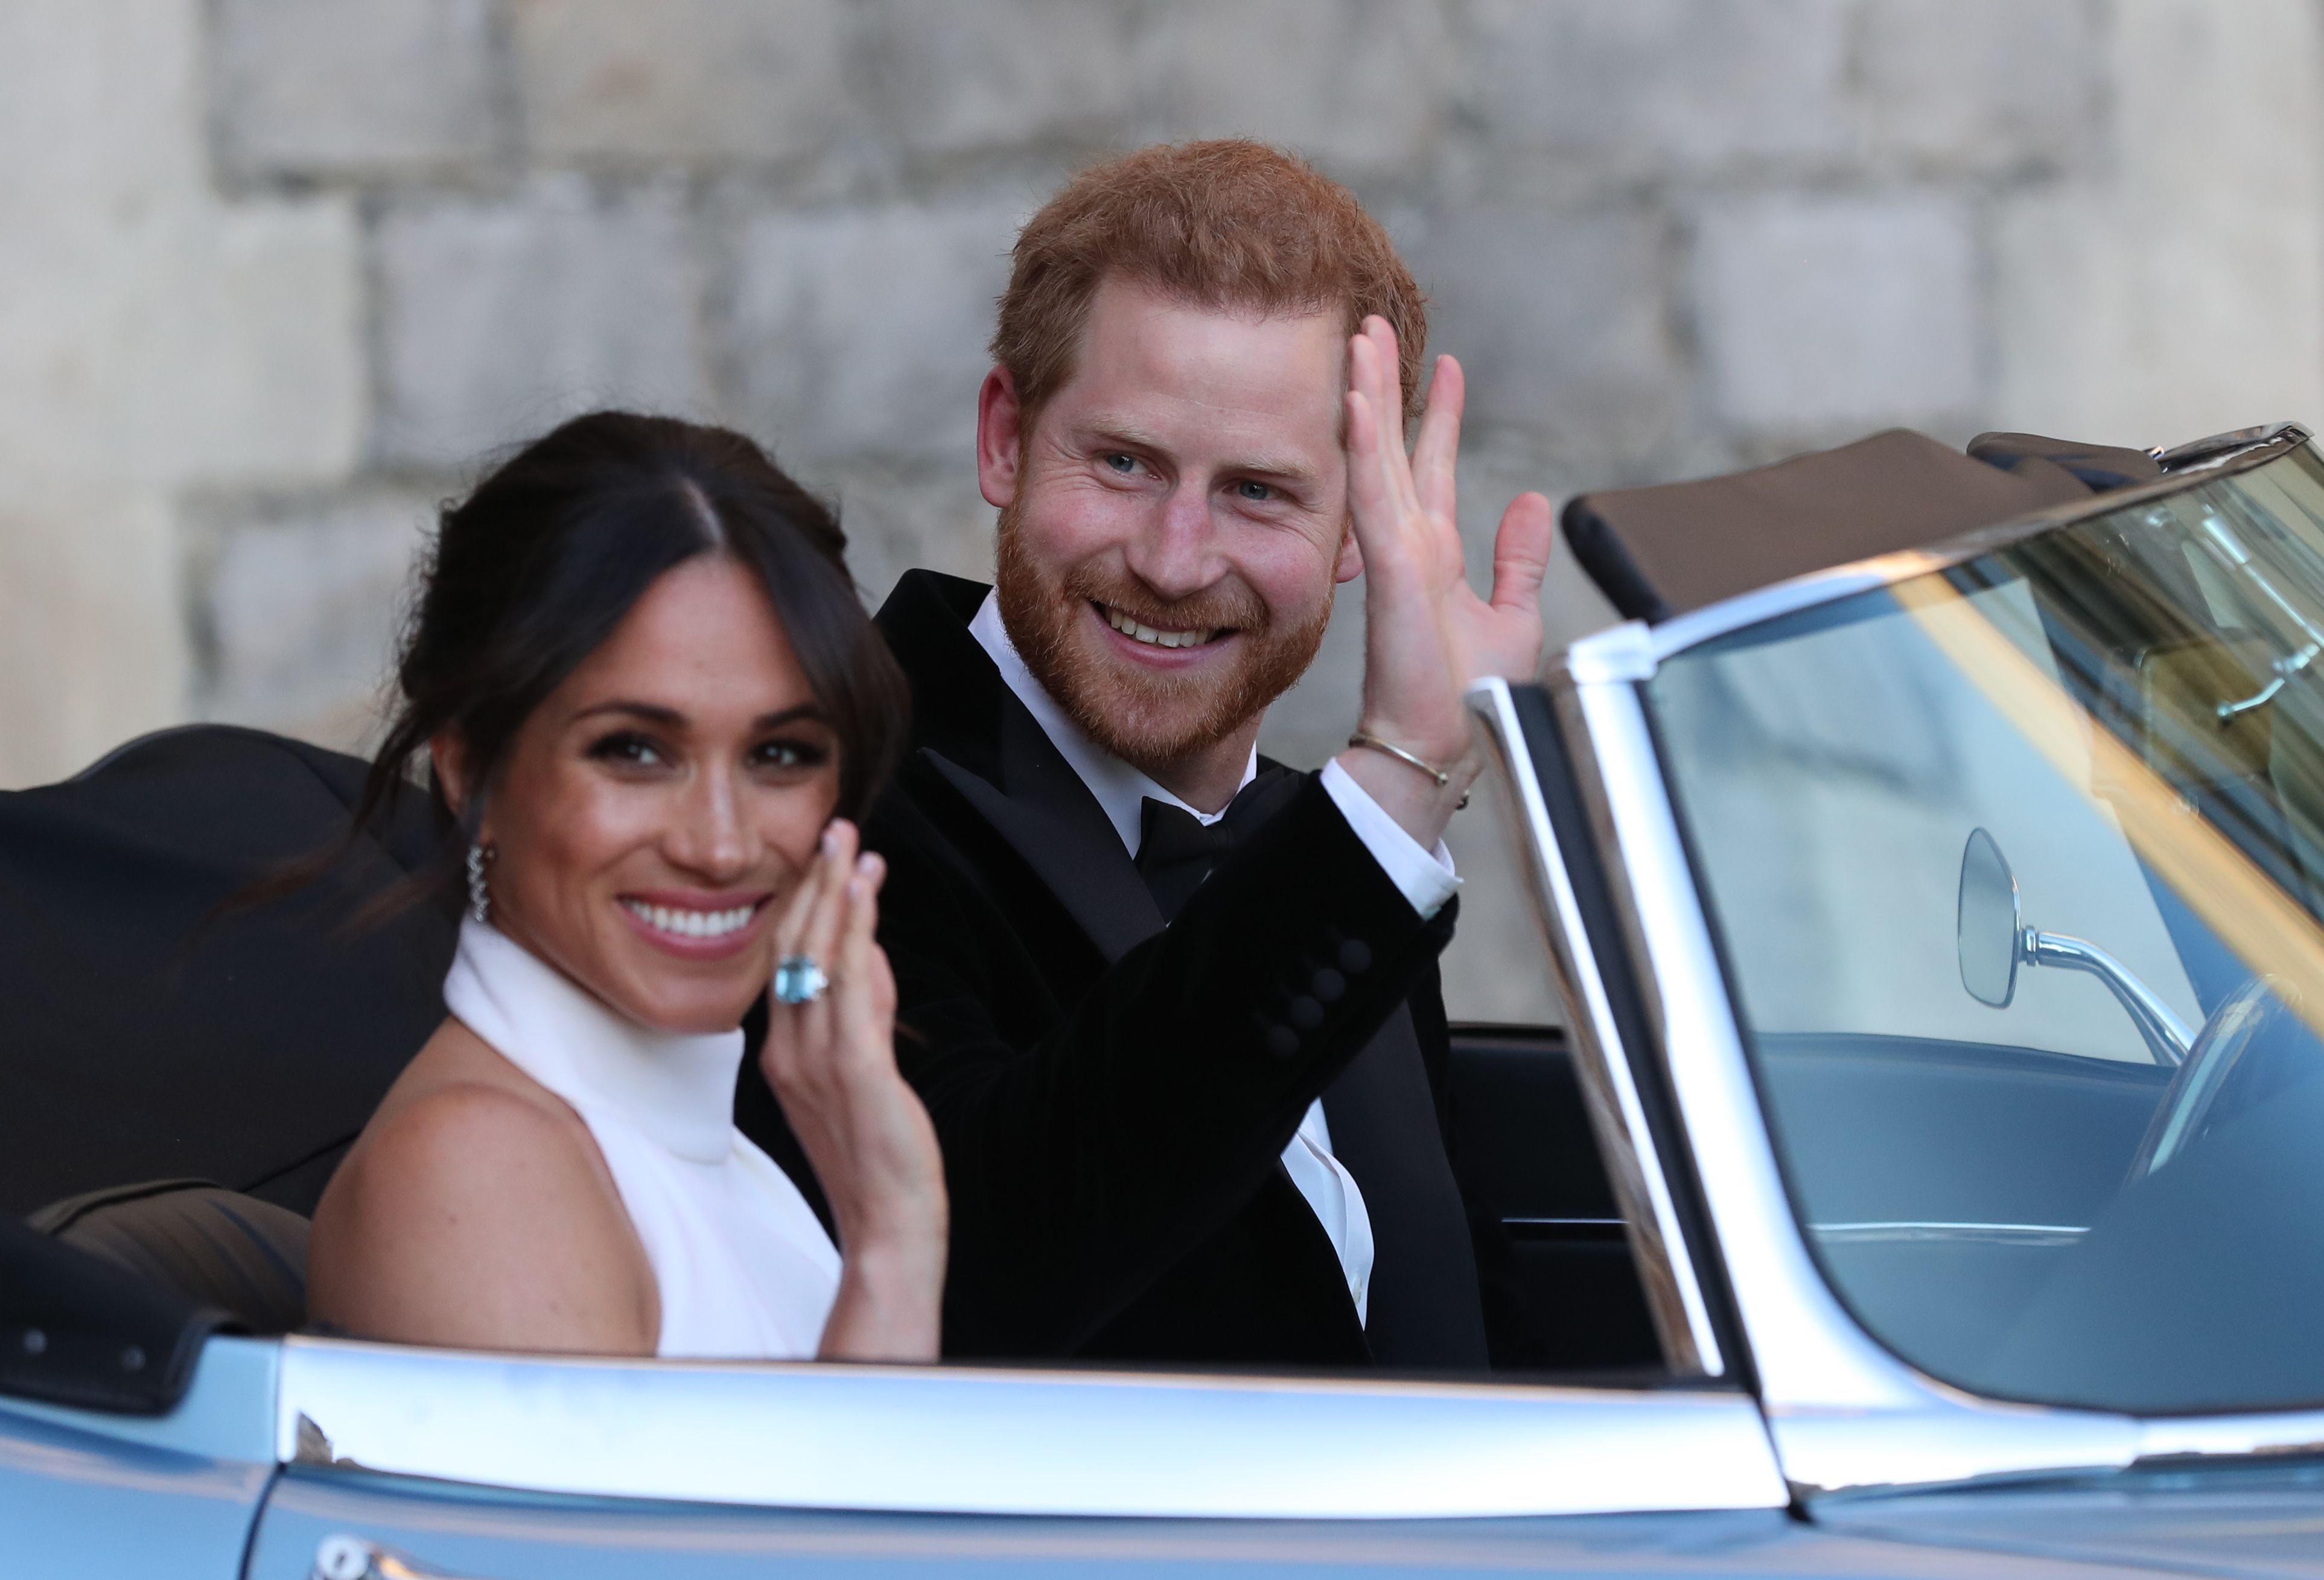 Meghan Markle And Prince Harry Officially Move To Frogmore Cottage And Out Of Kensington Palace